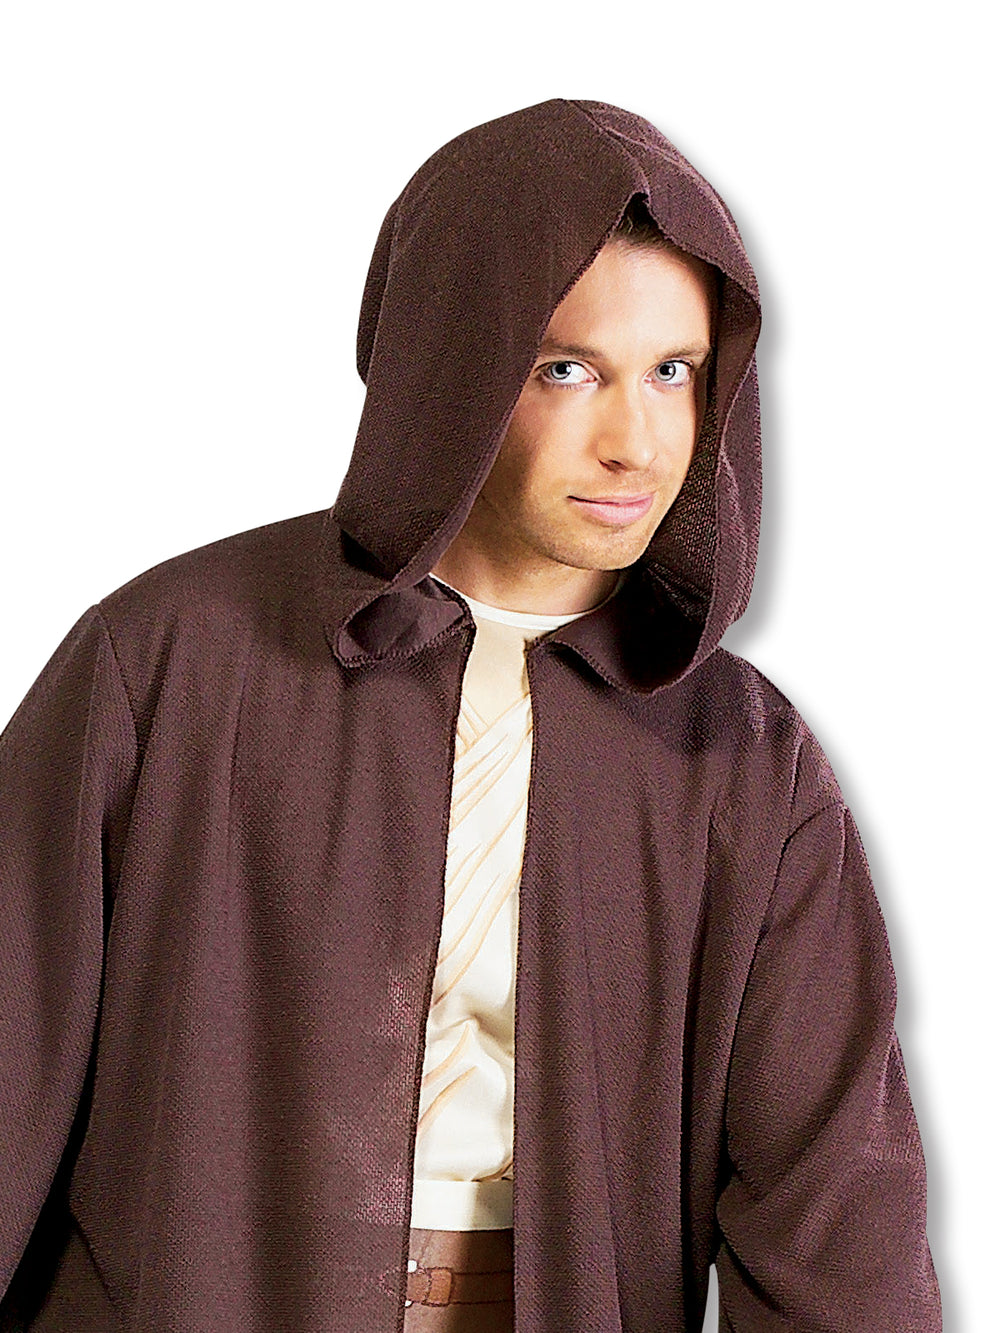 JEDI ROBE DELUXE, ADULT - Little Shop of Horrors